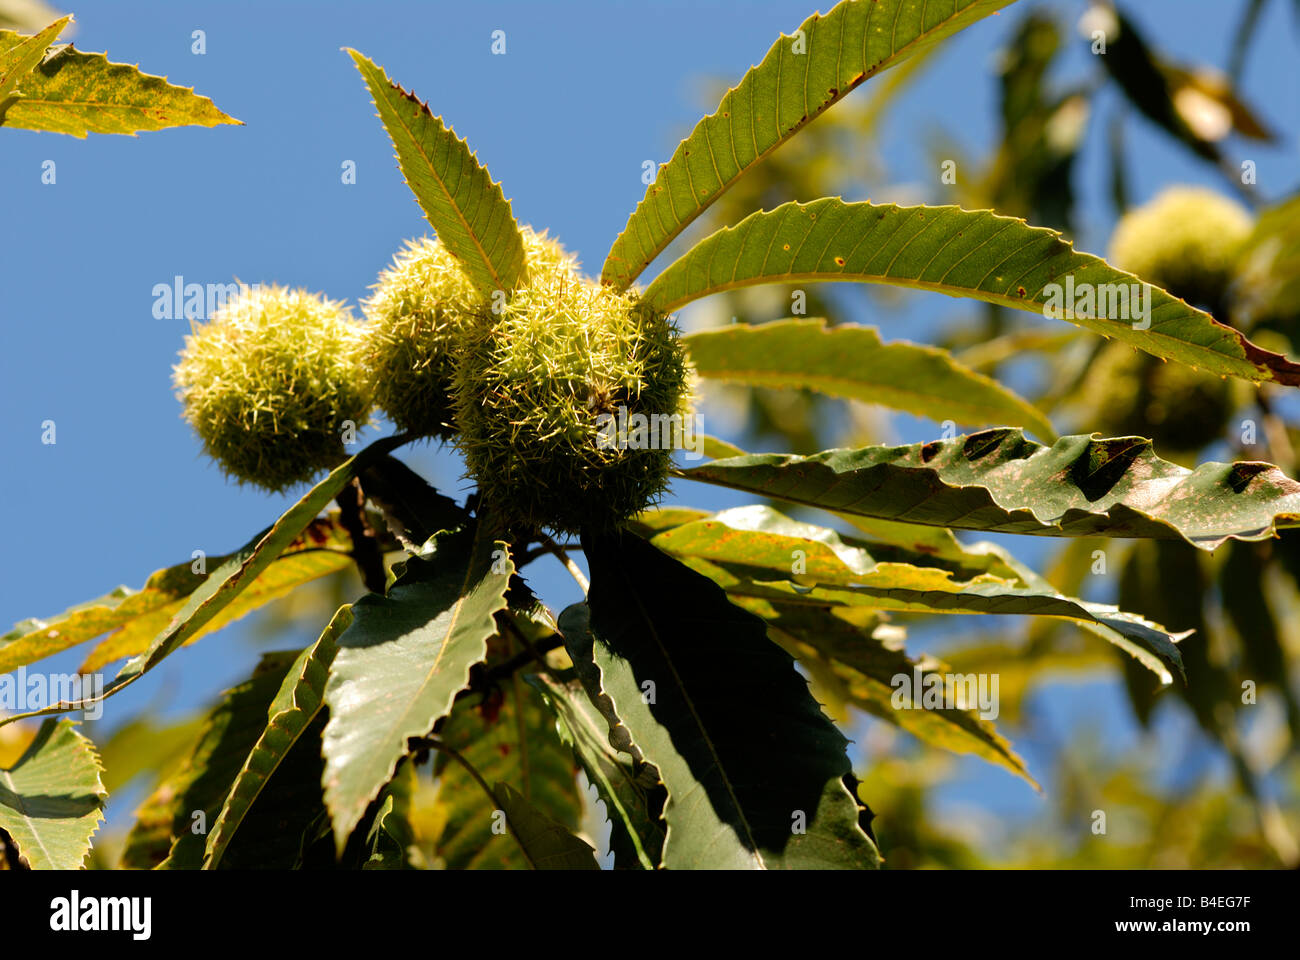 Stock photo of the fruit of the Sweet Chestnut tree Stock Photo